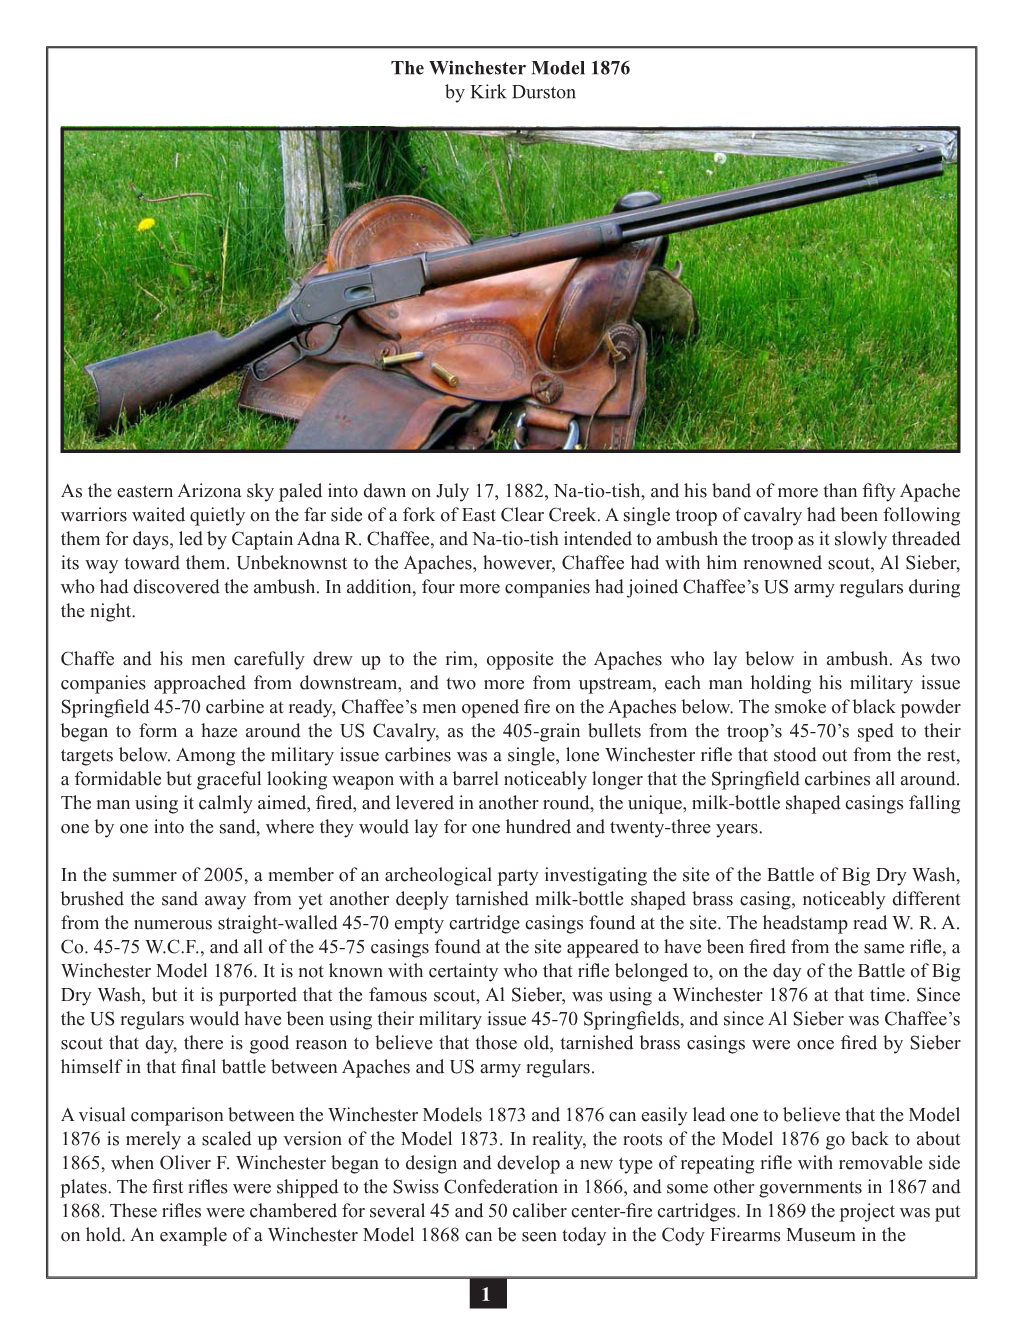 The Winchester Model 1876 by Kirk Durston